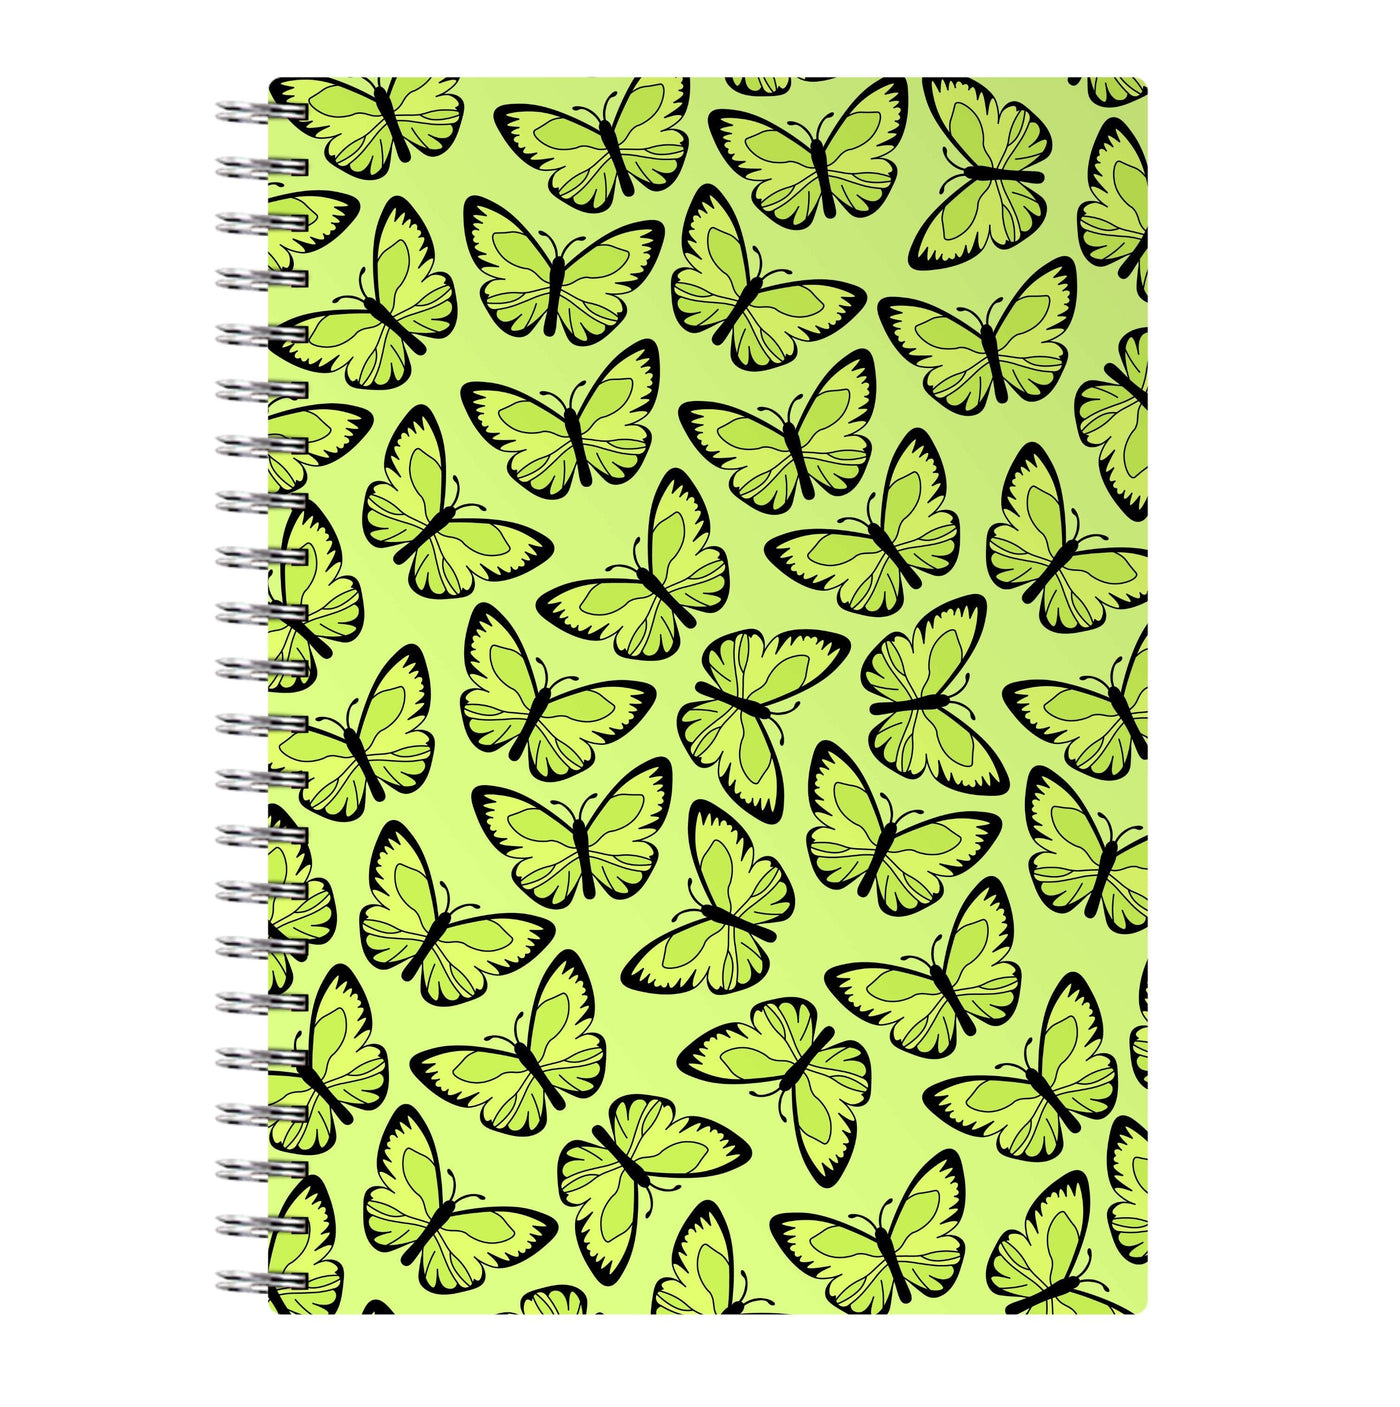 Yellow And Black Butterfly - Butterfly Patterns Notebook